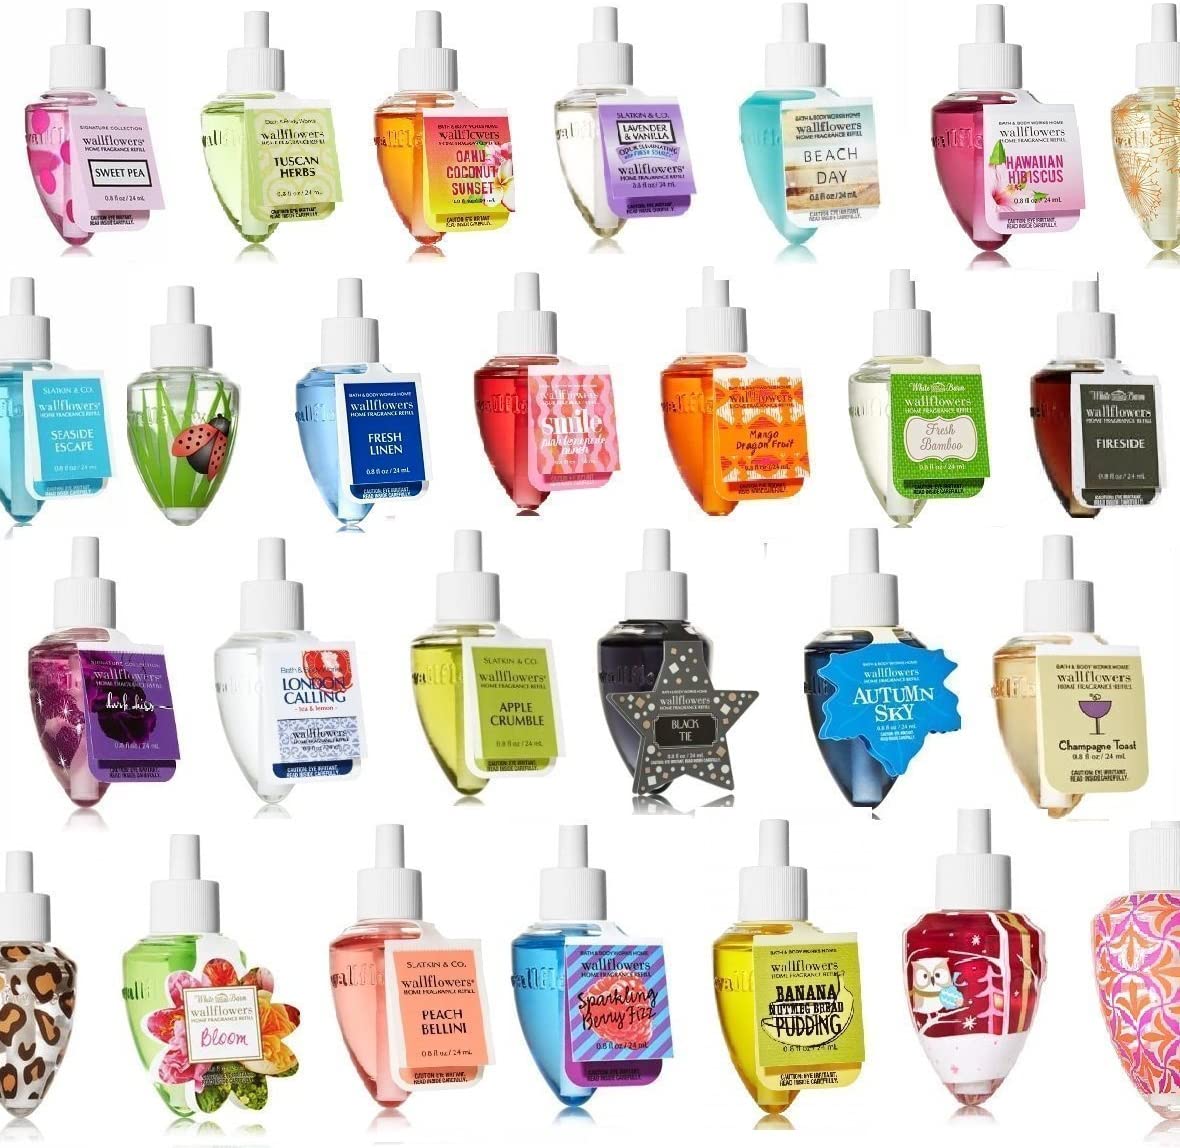 3.00 Wallflower Refills At Bath & Body Works! I Pay With Coupons